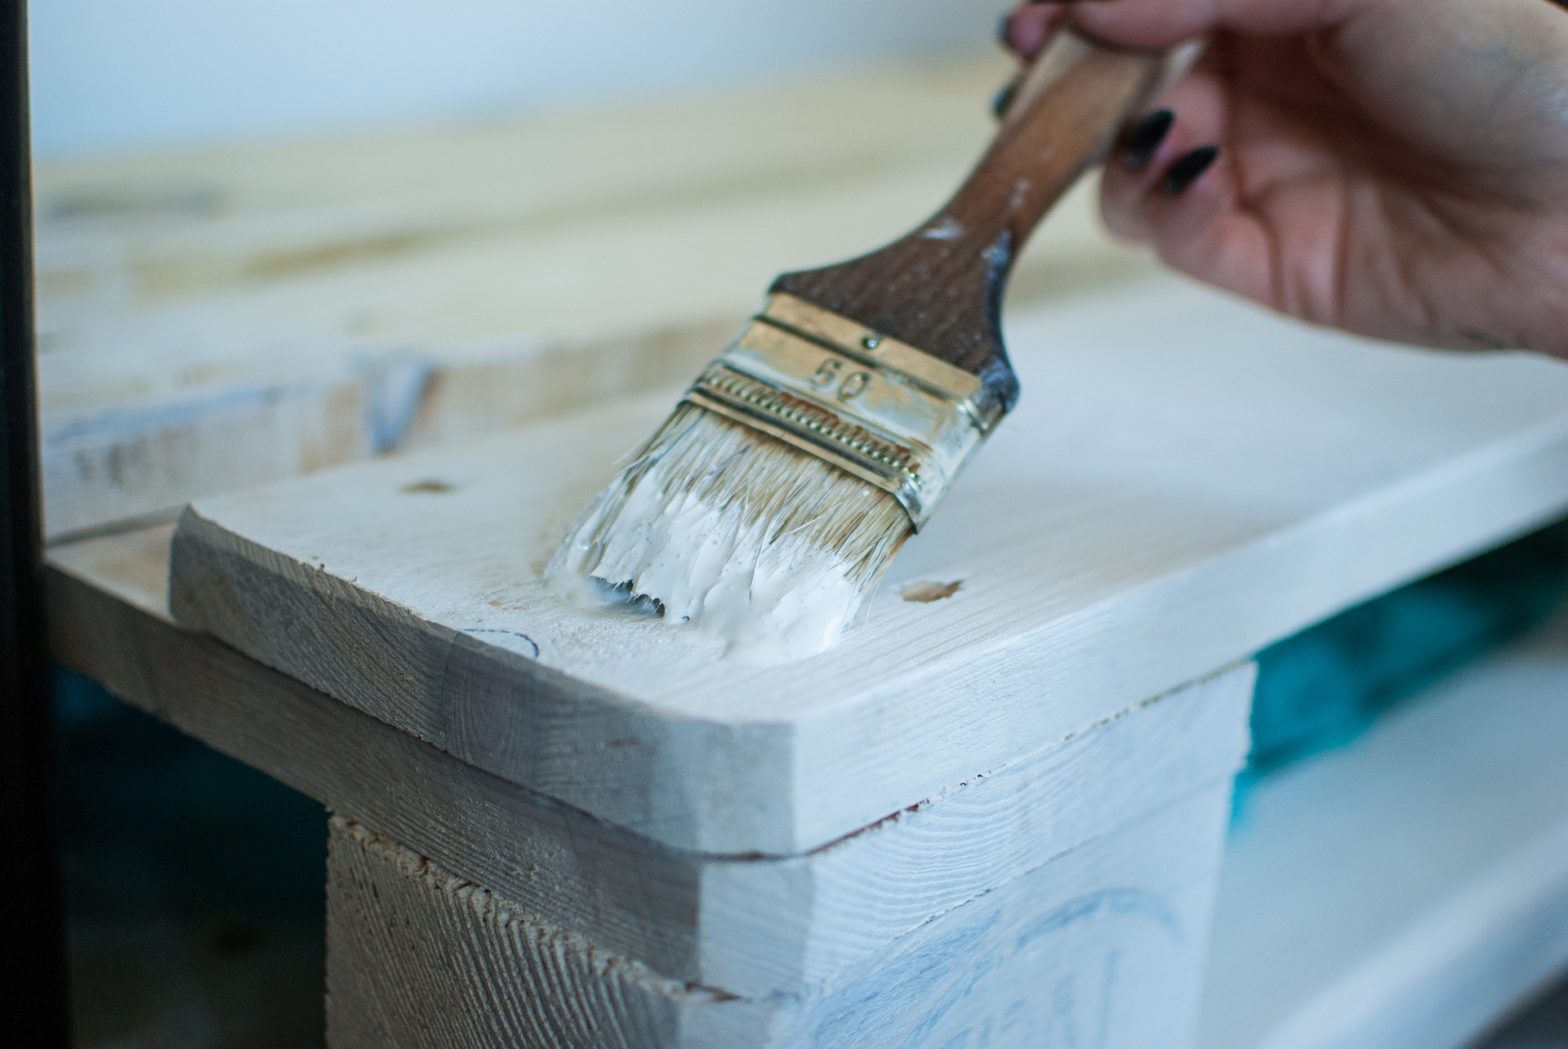 A person is holding a paintbrush and coloring the wood furniture with white color